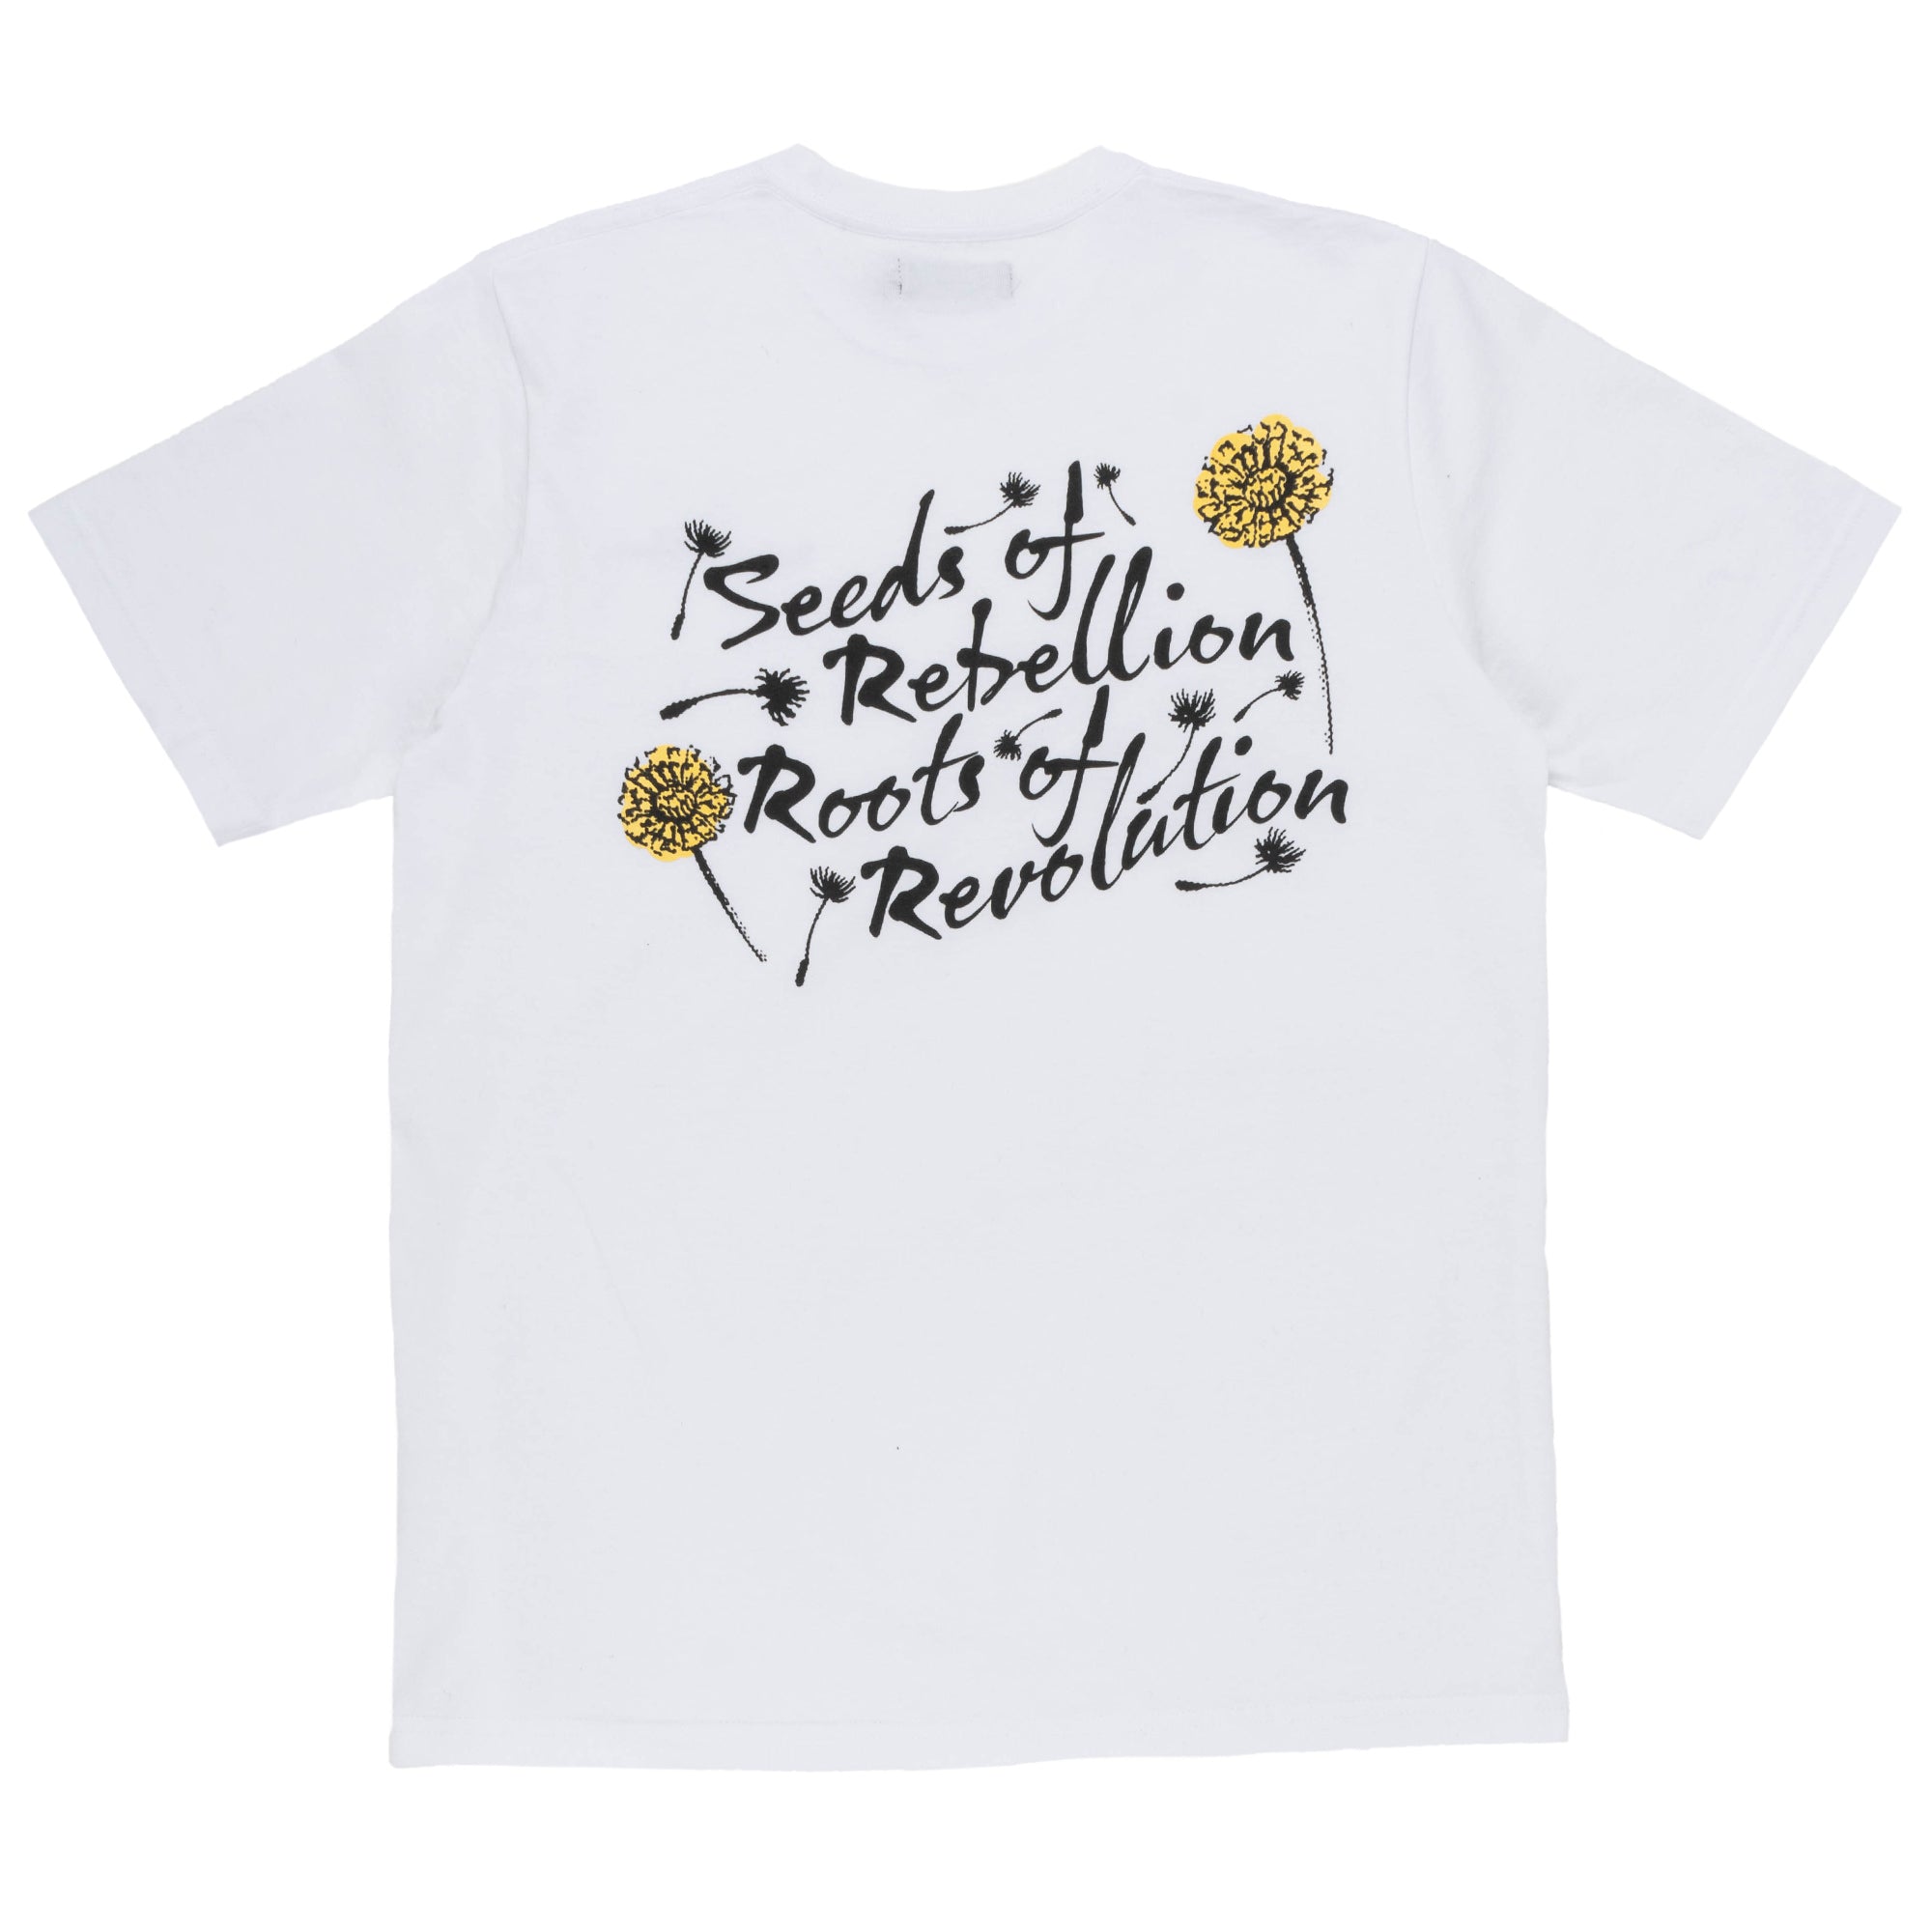 RBW Seeds of Rebellion Tee White